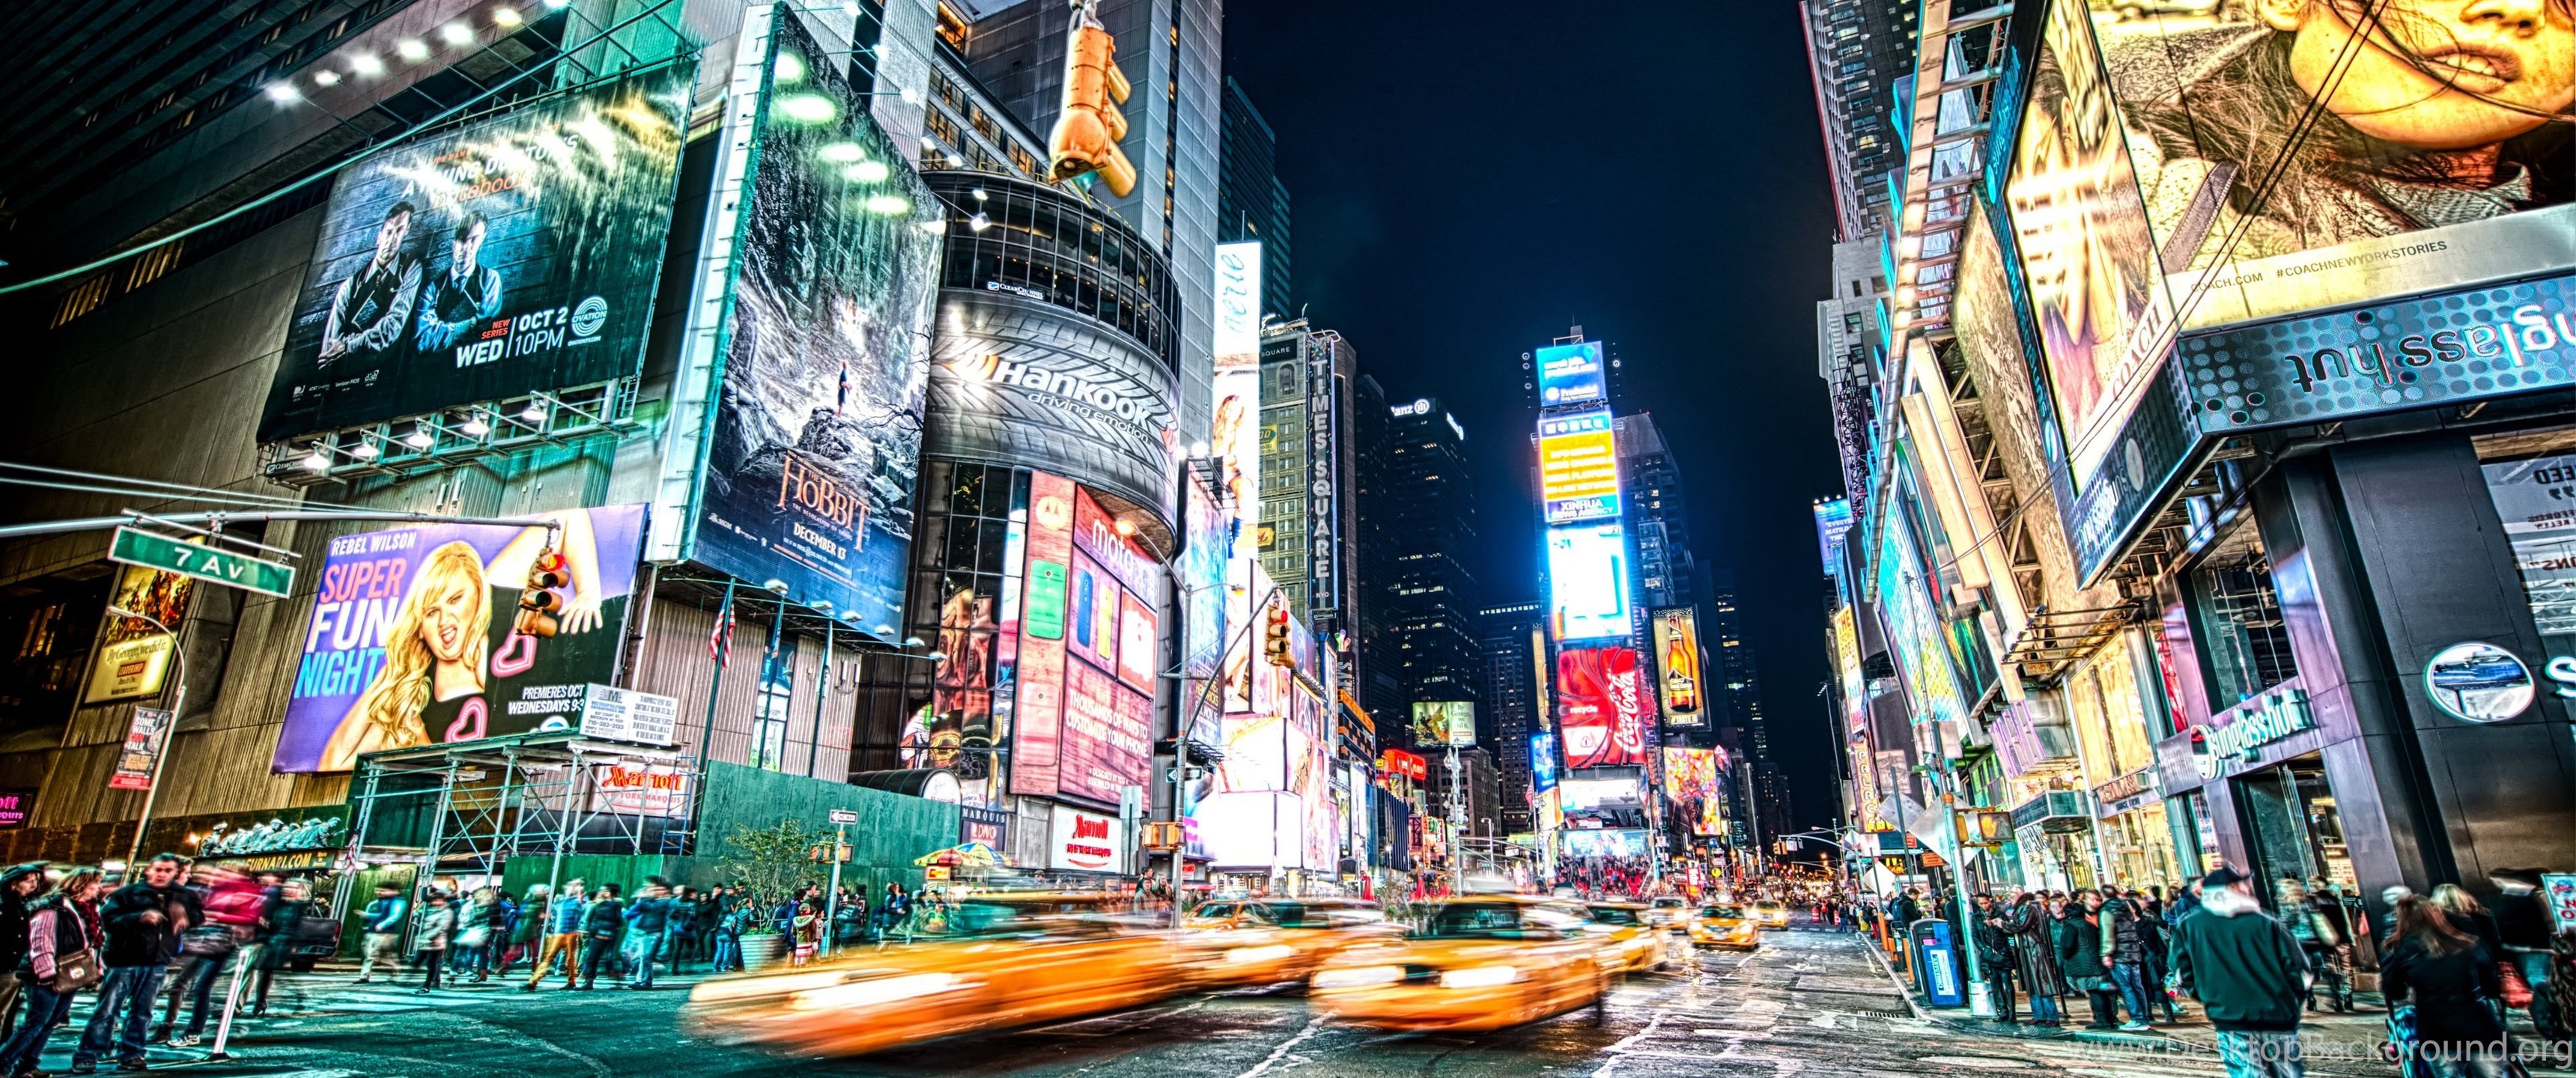 Yellow Cabs In New York Times Square Wallpaper - HD Wallpaper Desktop Background